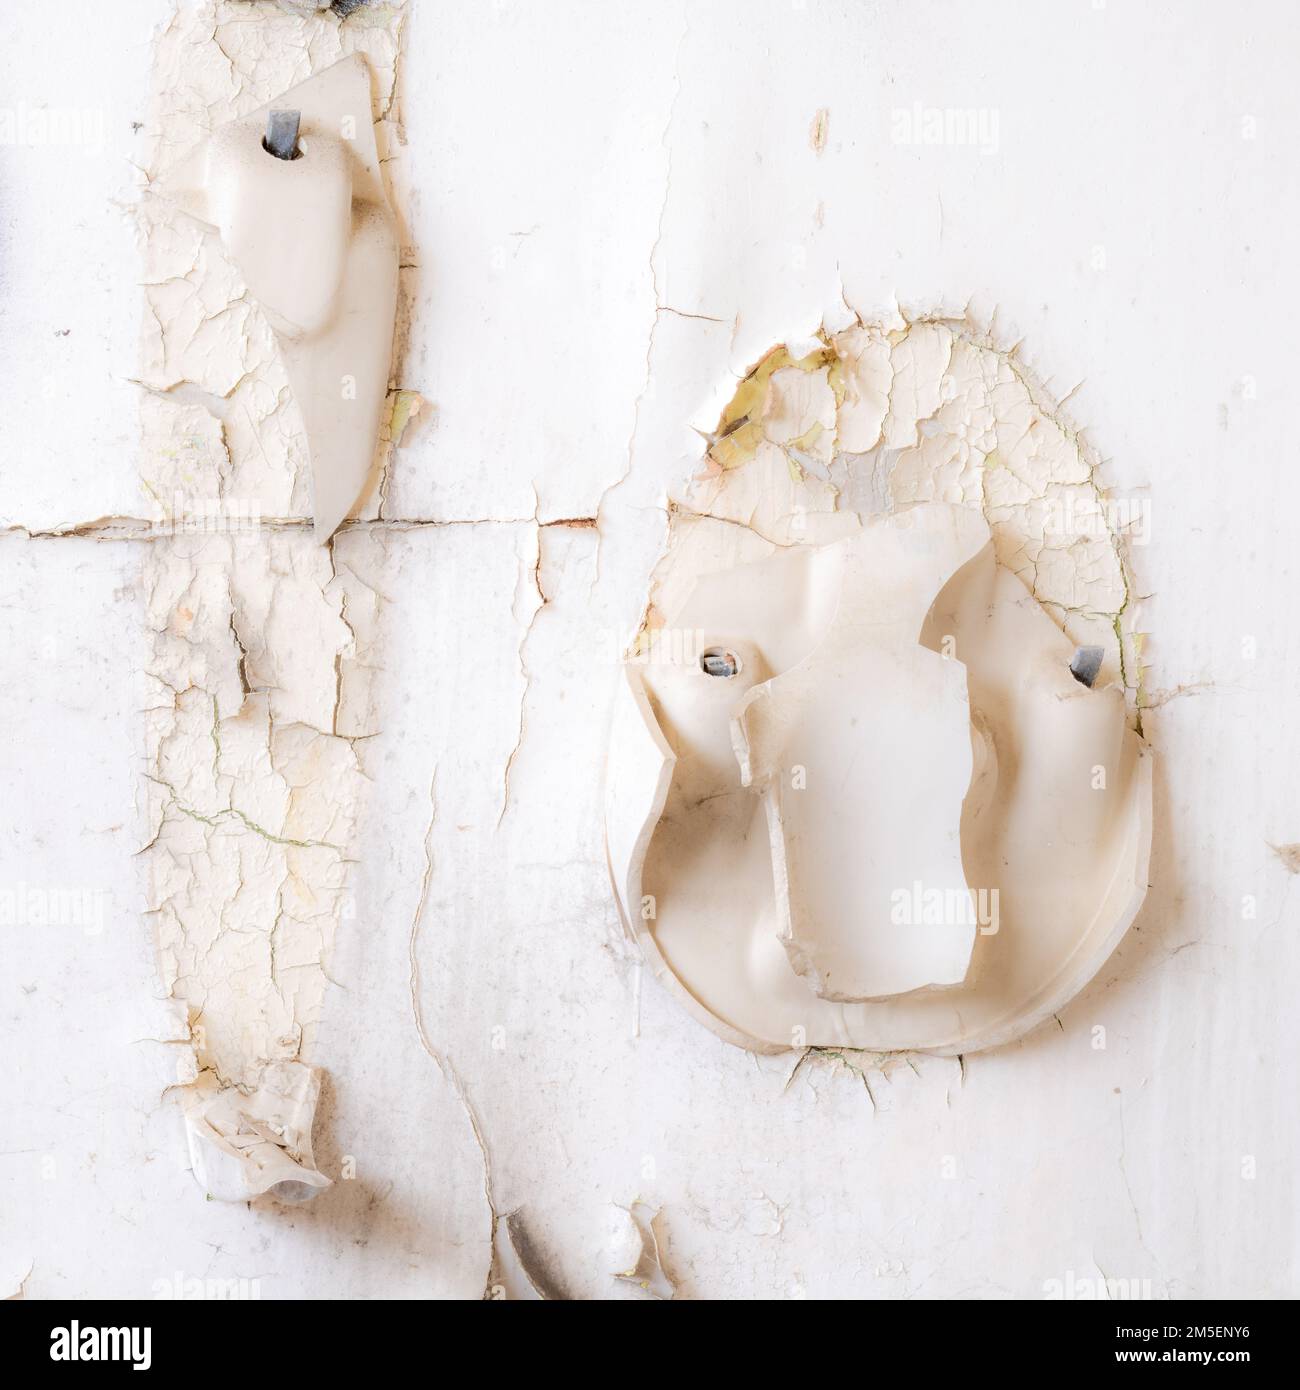 Square image of a broken urinal on a dilapidated wall Stock Photo